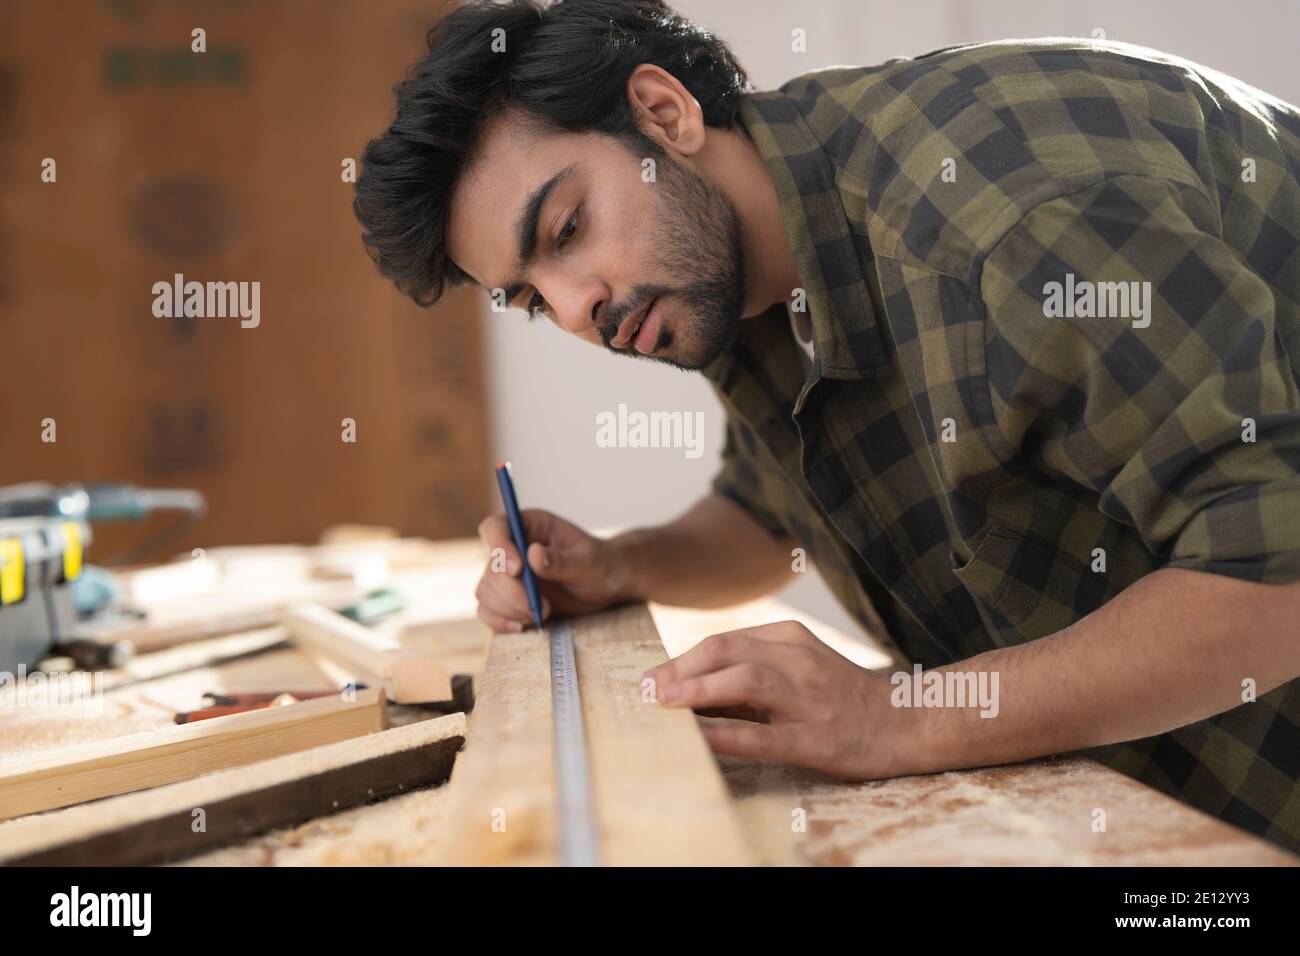 A YOUNG CARPENTER MARKING WOOD USING SCALE WHILE WORKING Stock Photo